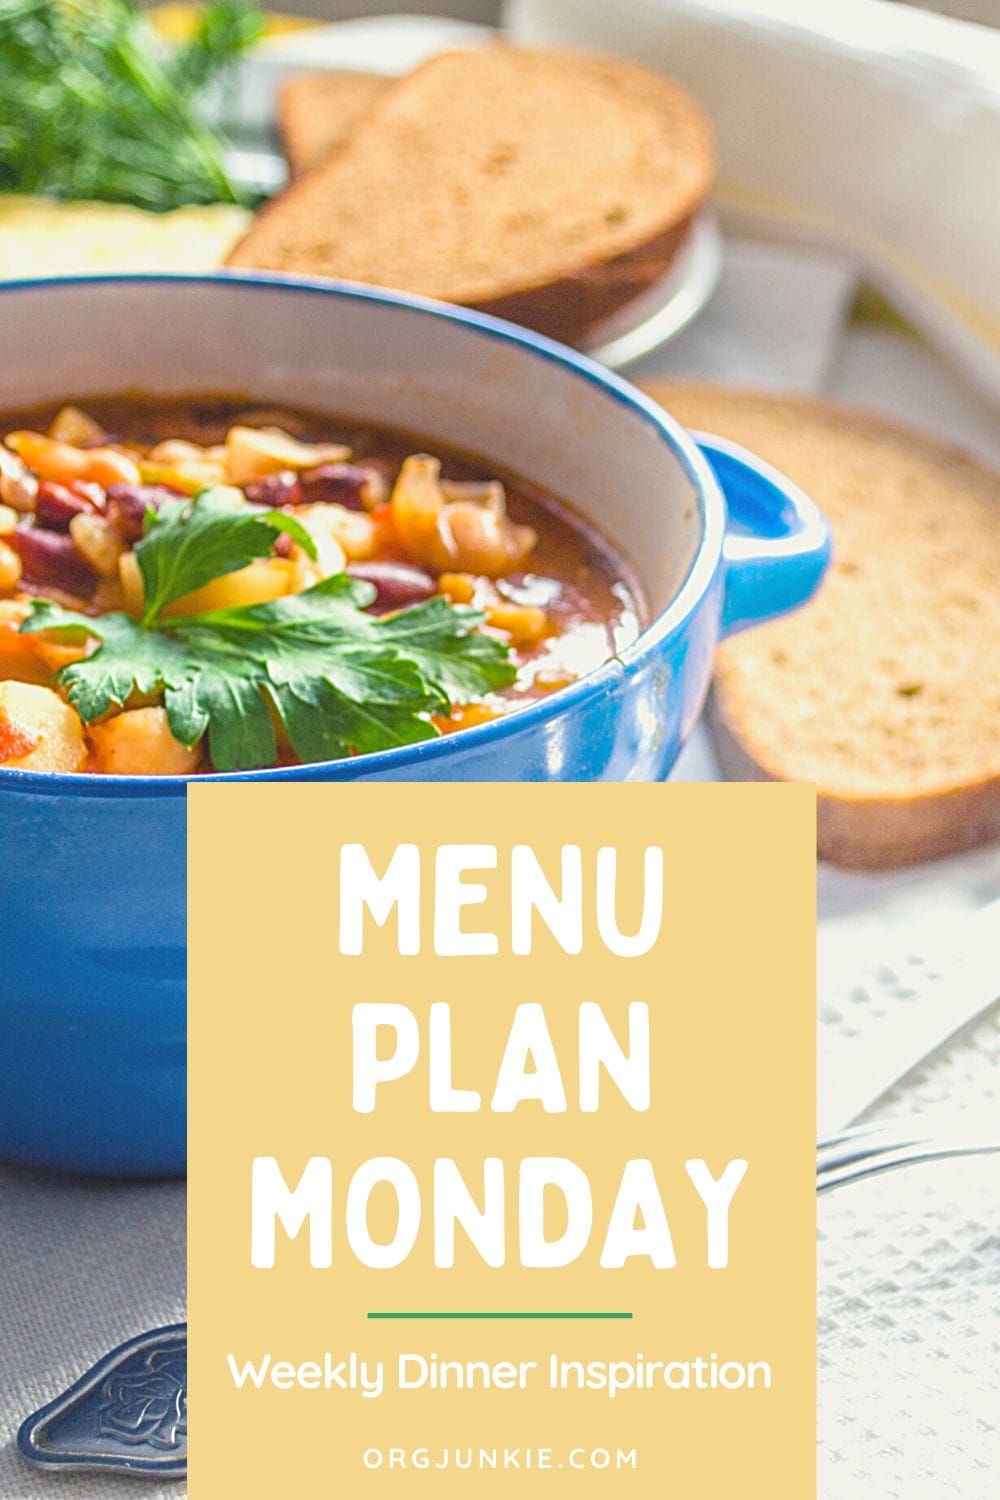 Menu Plan Monday for the week of Sept 14/20 ~ Weekly Dinner Inspiration at I'm an Organizing Junkie